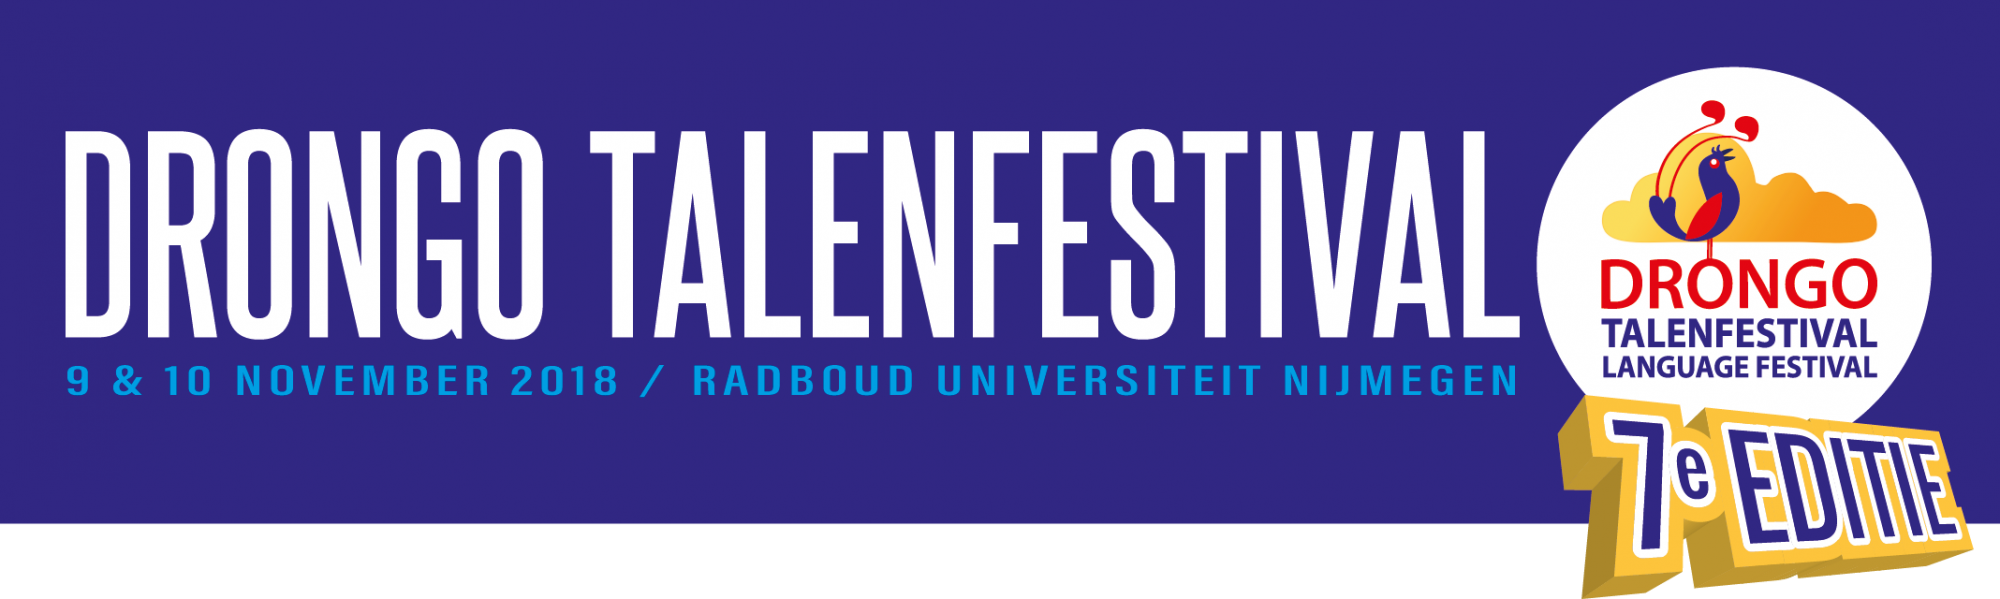 DRONGO talenfestival 2018